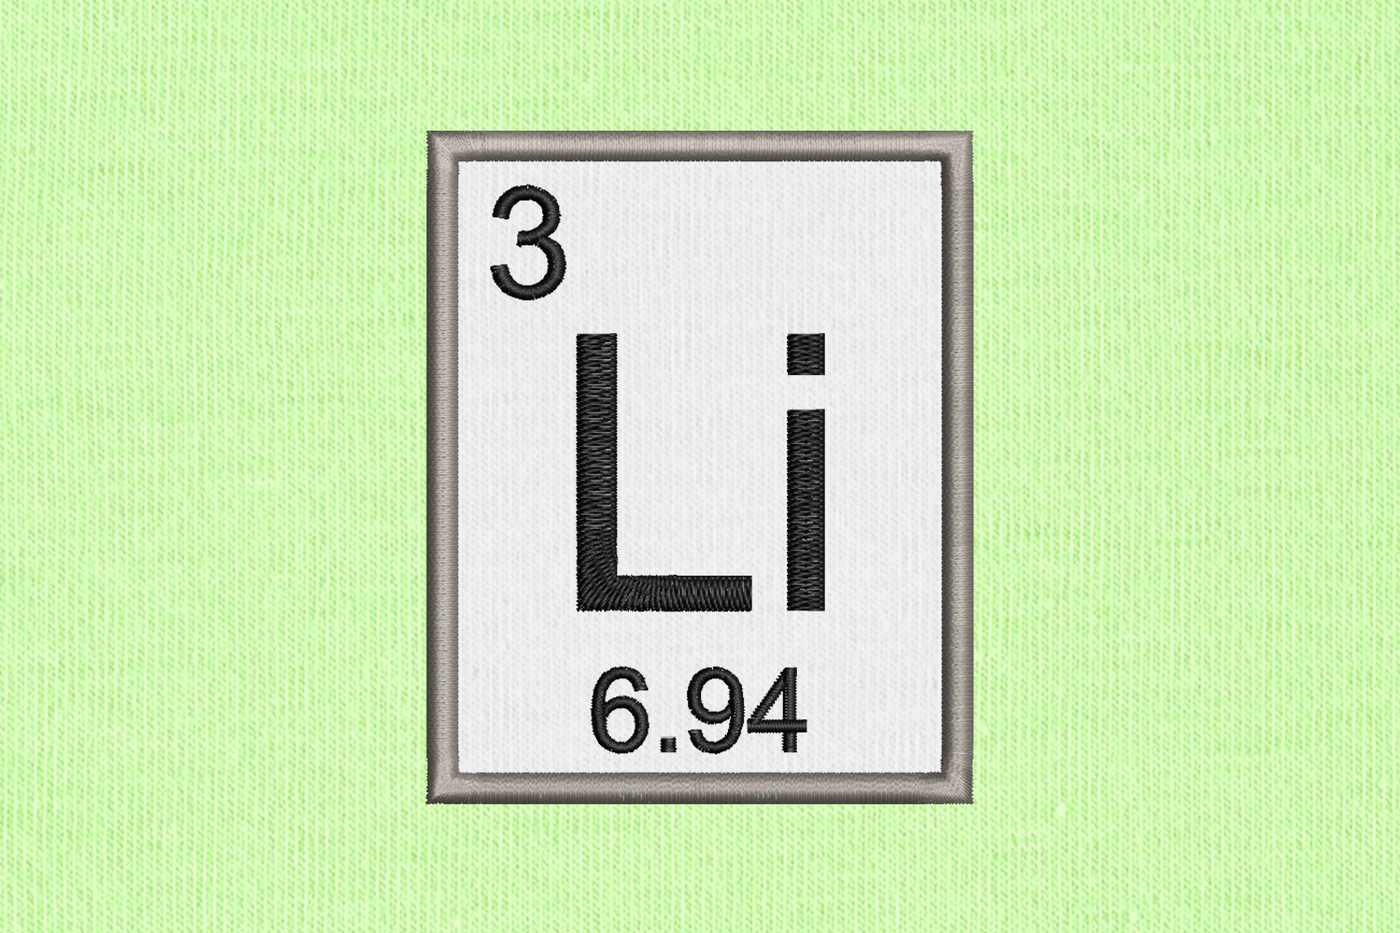 Applique design for the chemical element information for lithium